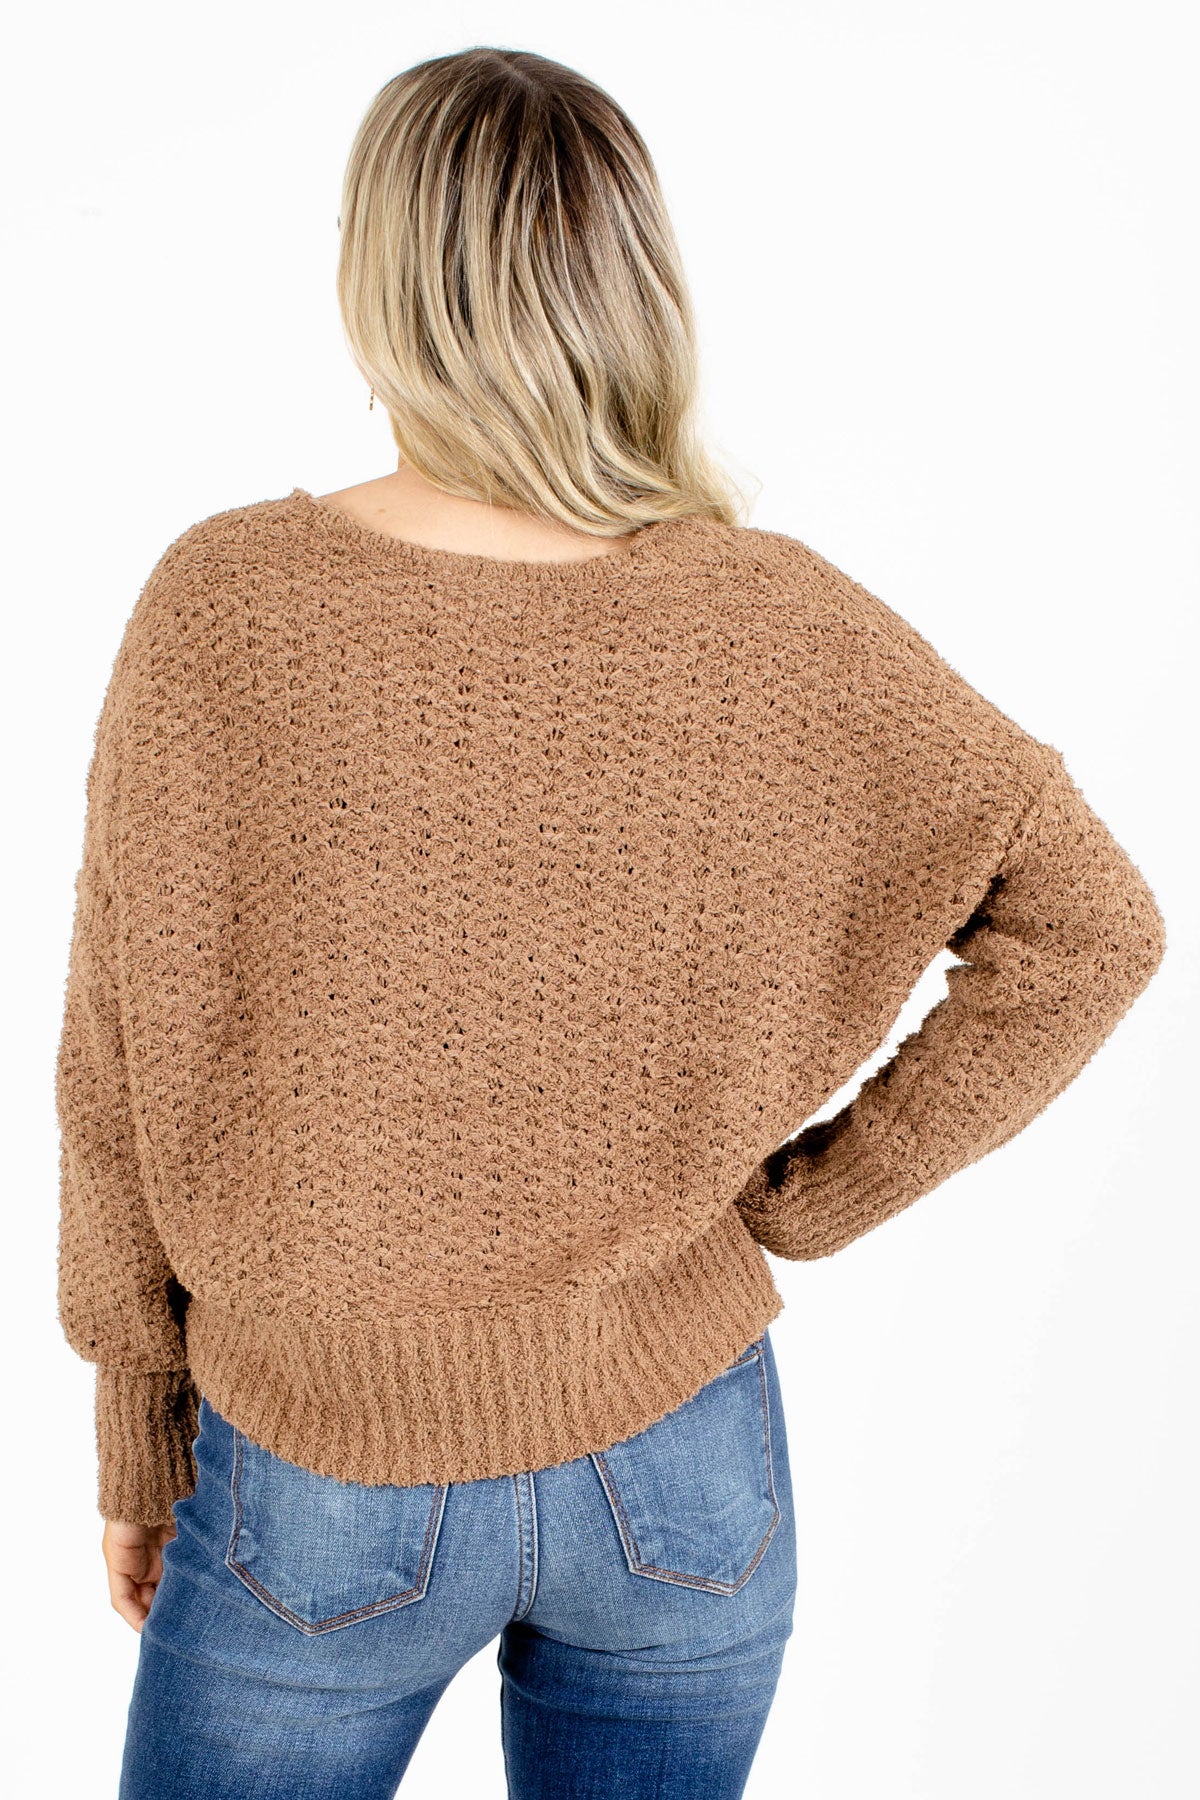 Cozy Casual Sweater in Boutique Style